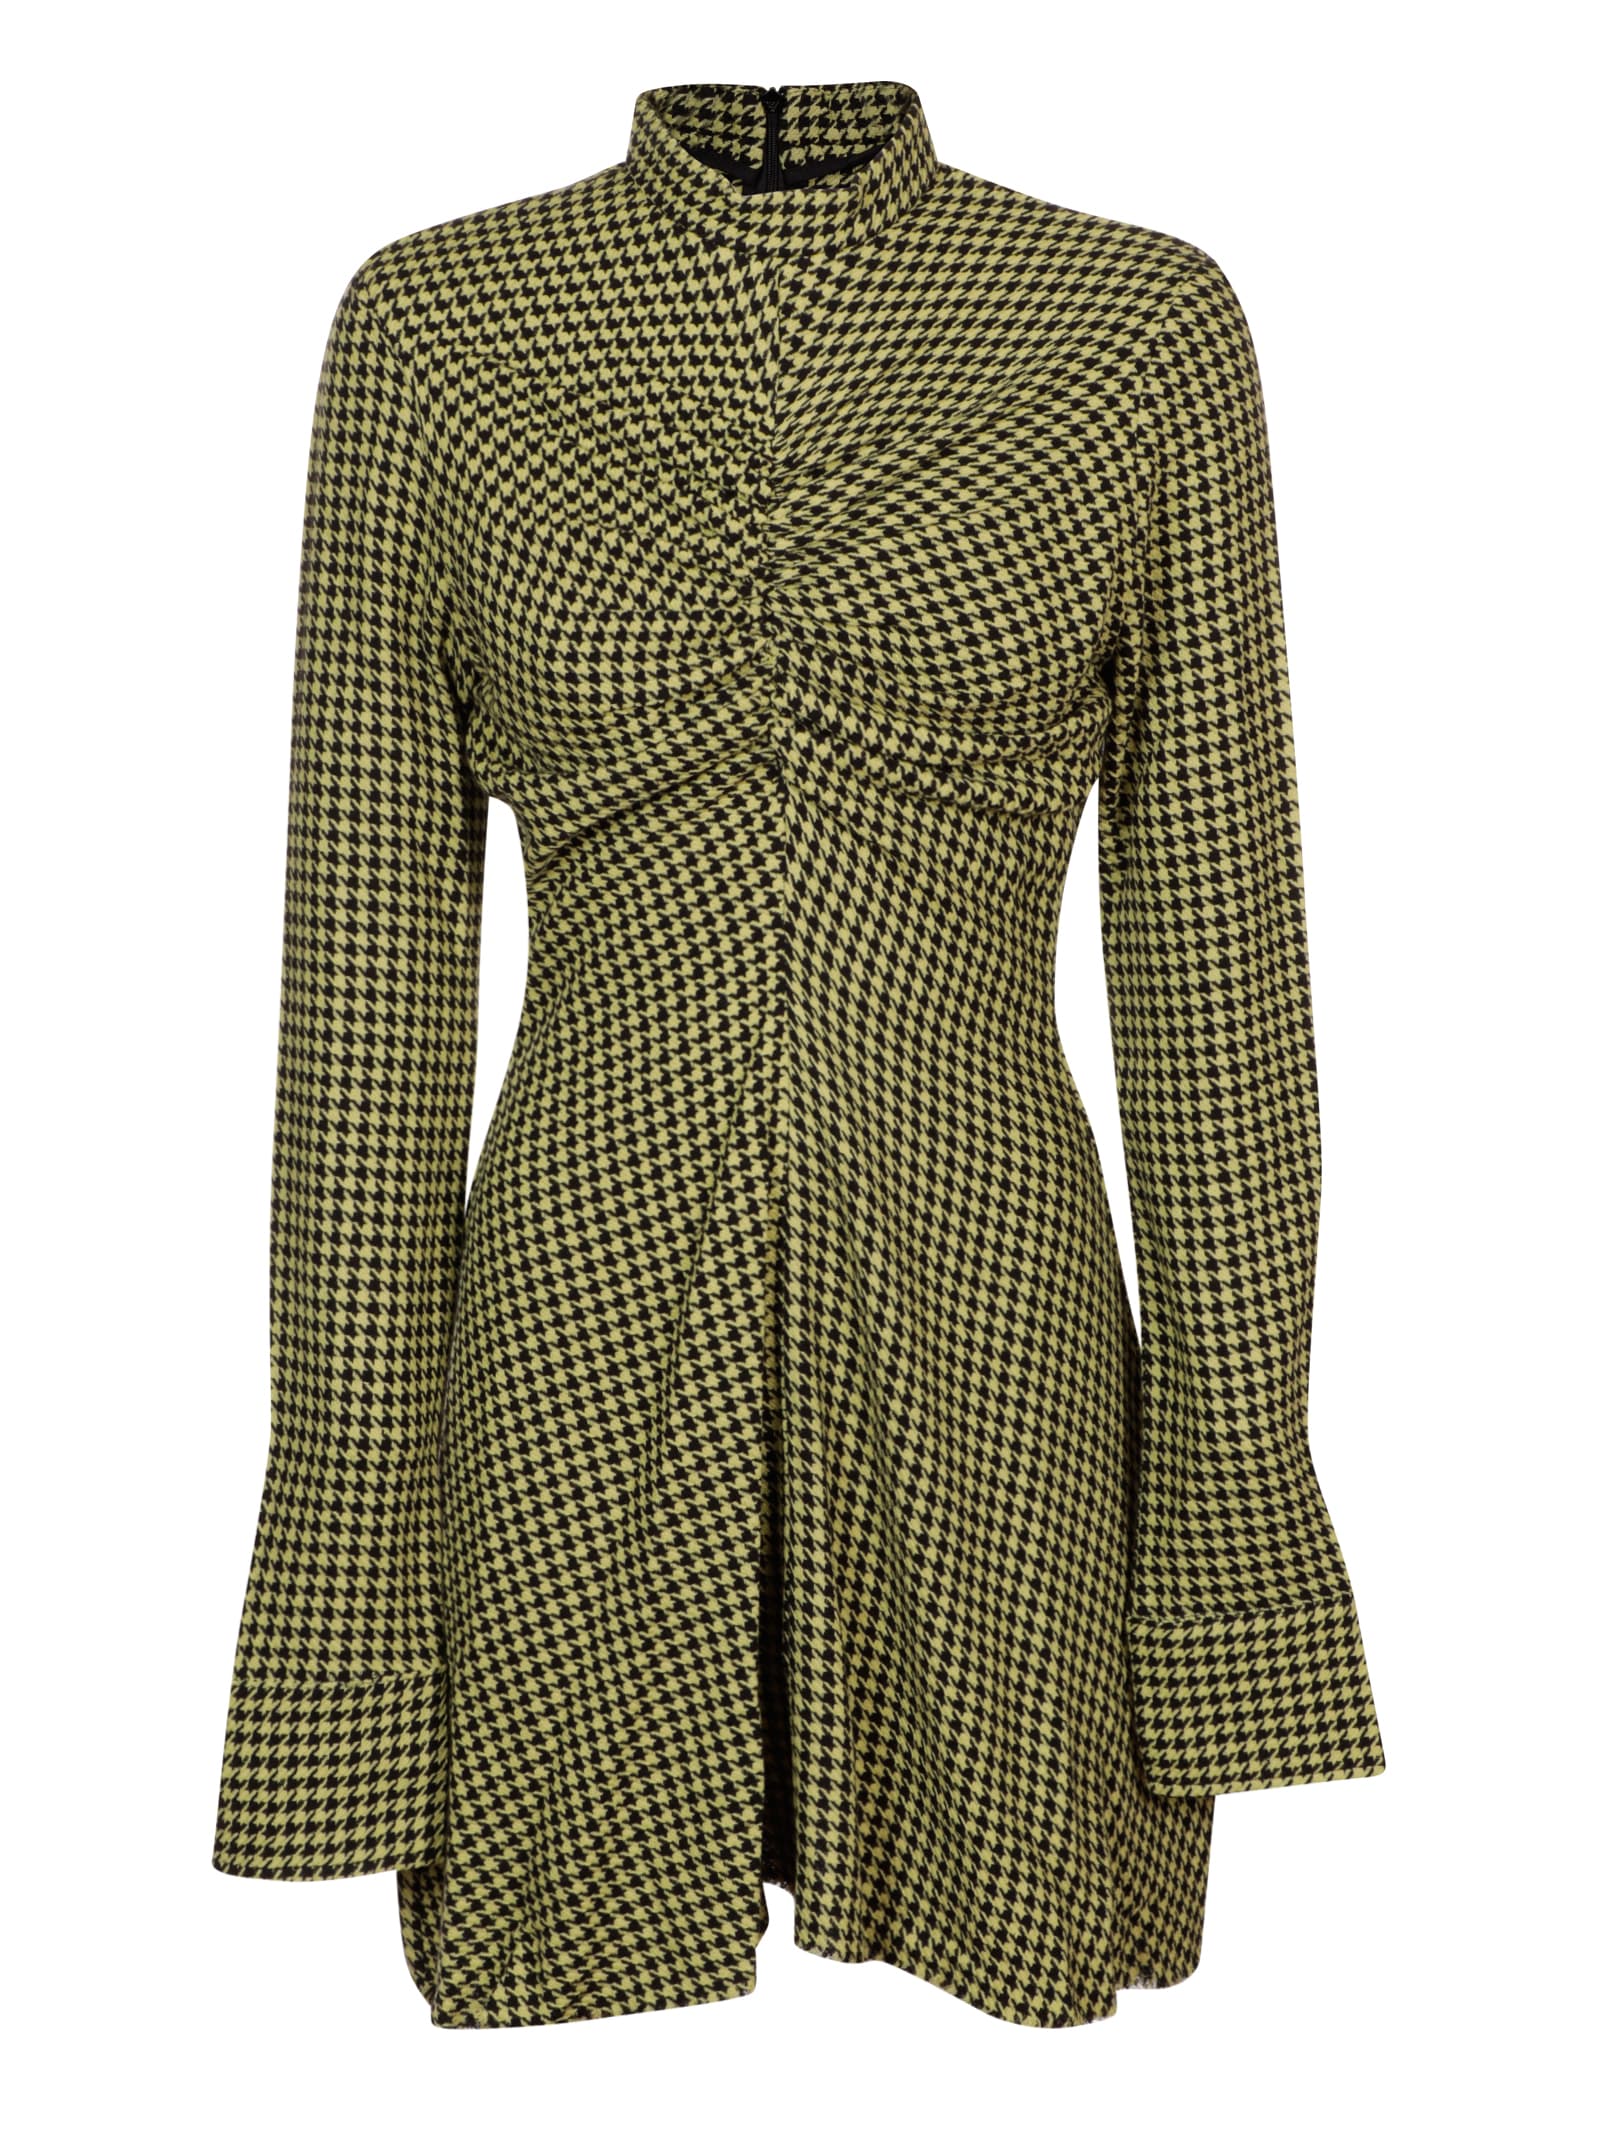 Marques'Almeida Ruched Front Dress